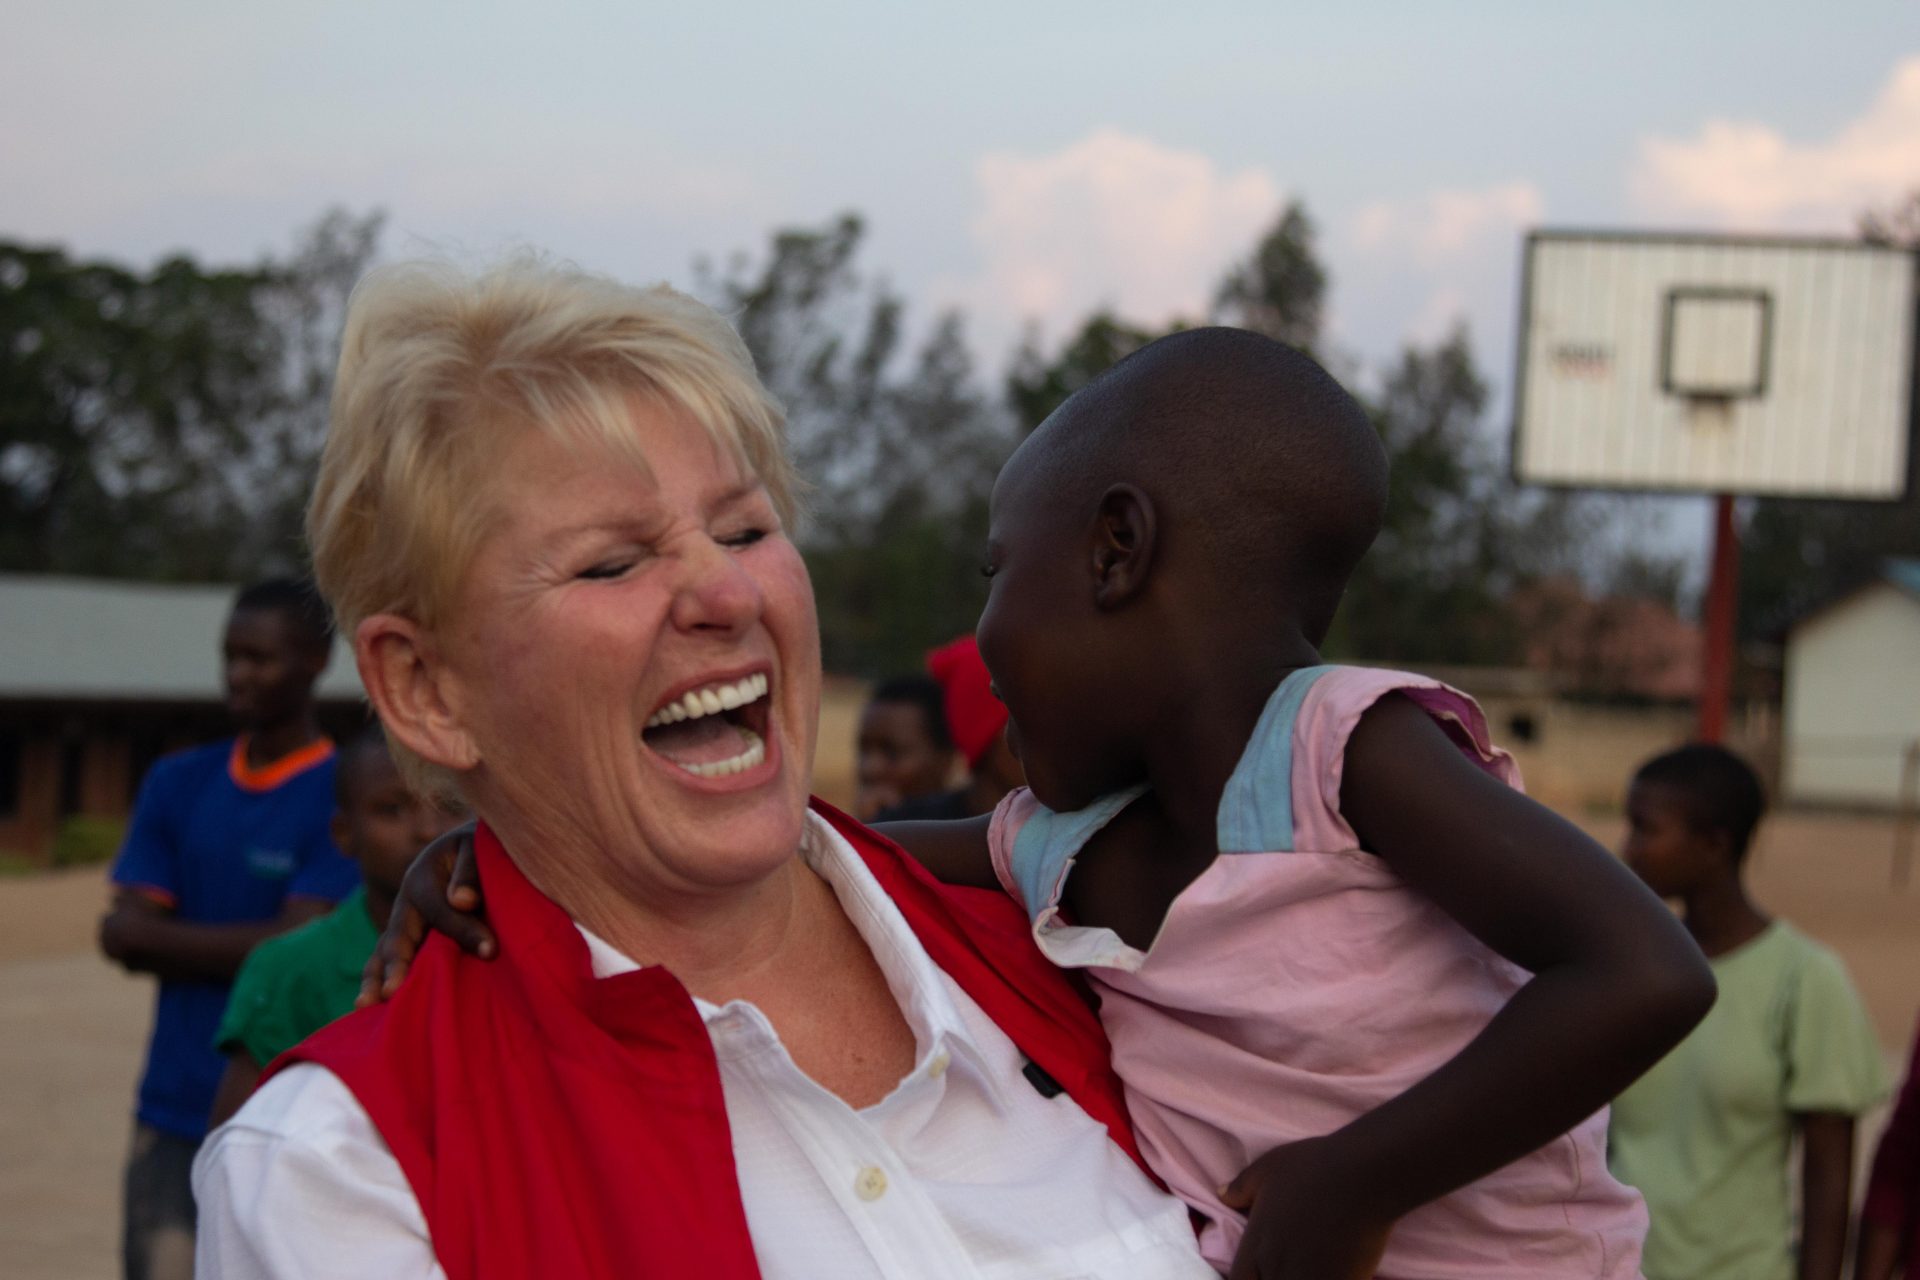 Doing charity work in Kigali, Rwanda with orphans.  We brought books, toys, clothes and danced with the kids.  Sandi had an absolute ball.